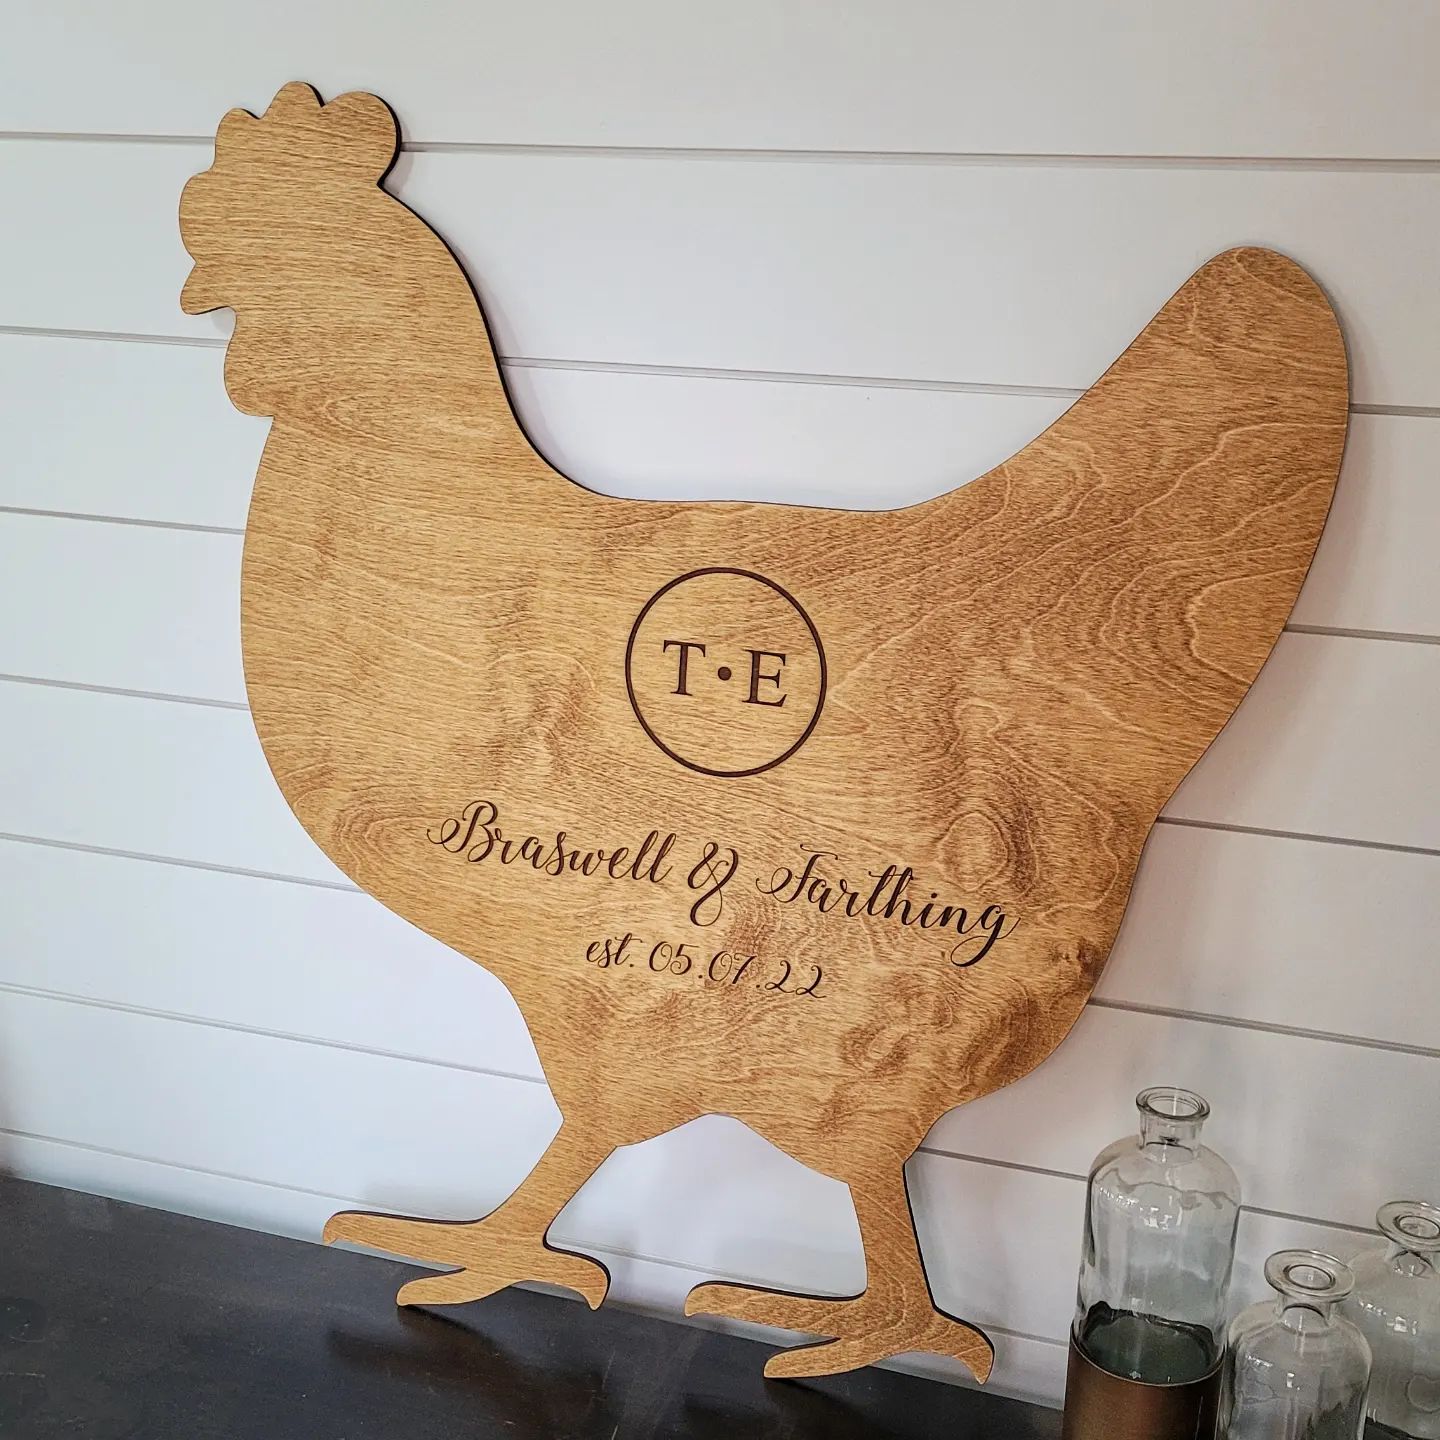 Custom wedding signs are always a hit! 

#lazylabacres #weddingsigns #customdecor #chickensign #farmwedding #gethitched #woodworking #laserengraving #woodensign #weddingguestbook